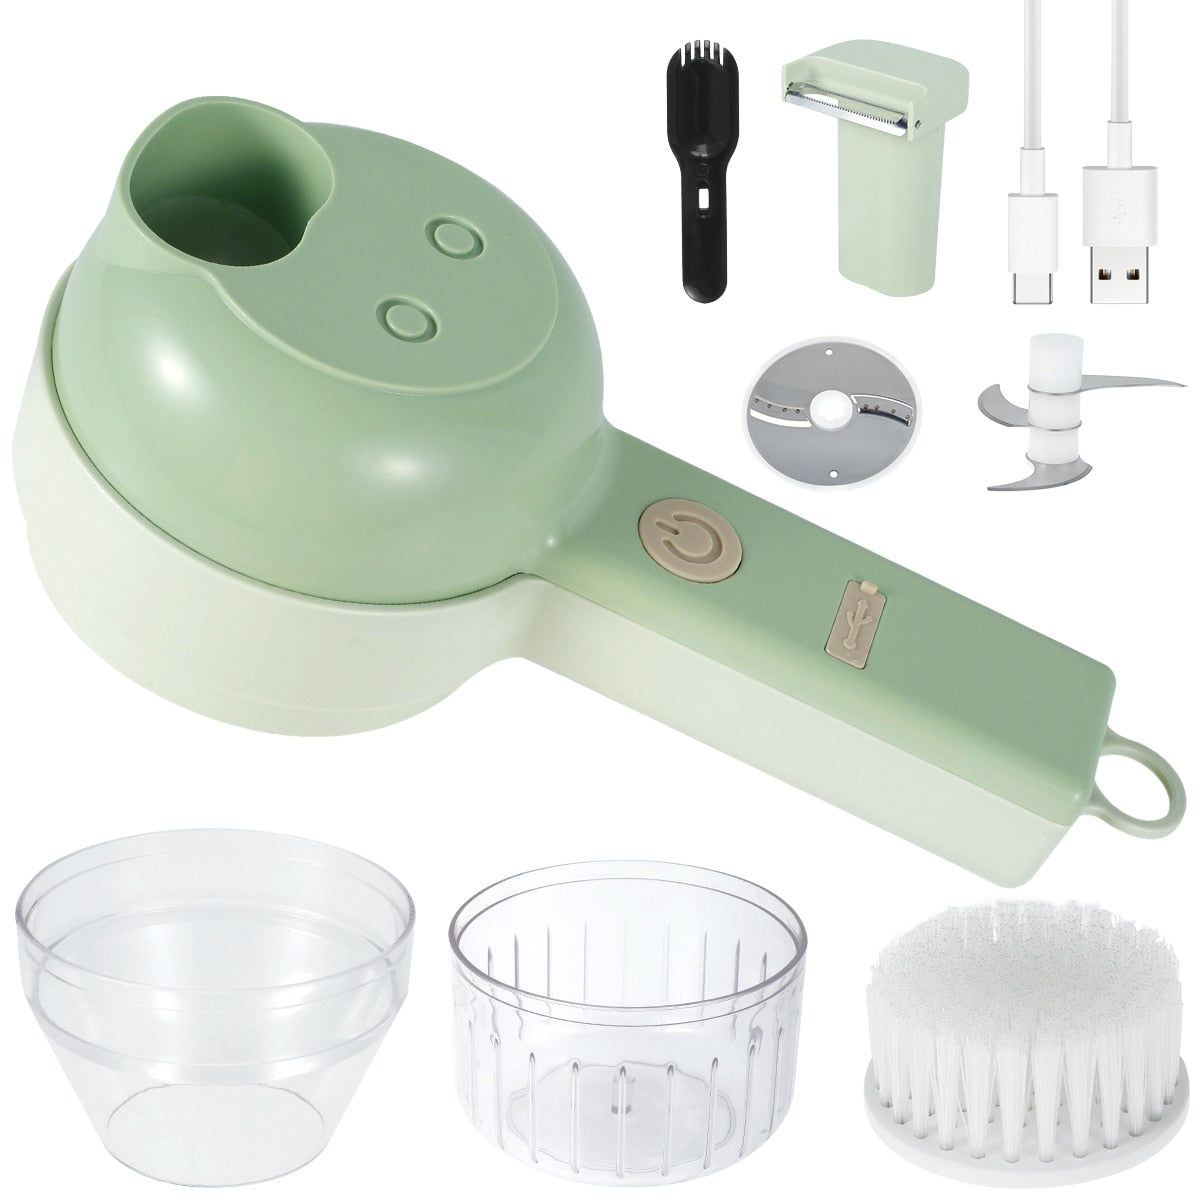 Manual Food Processor Vegetable Chopper 2.3 Cup Small Mini Hand Pull String  Onion Chopper Garlic Mincer Cutter with 3 Stainless Steel Blades - Dark